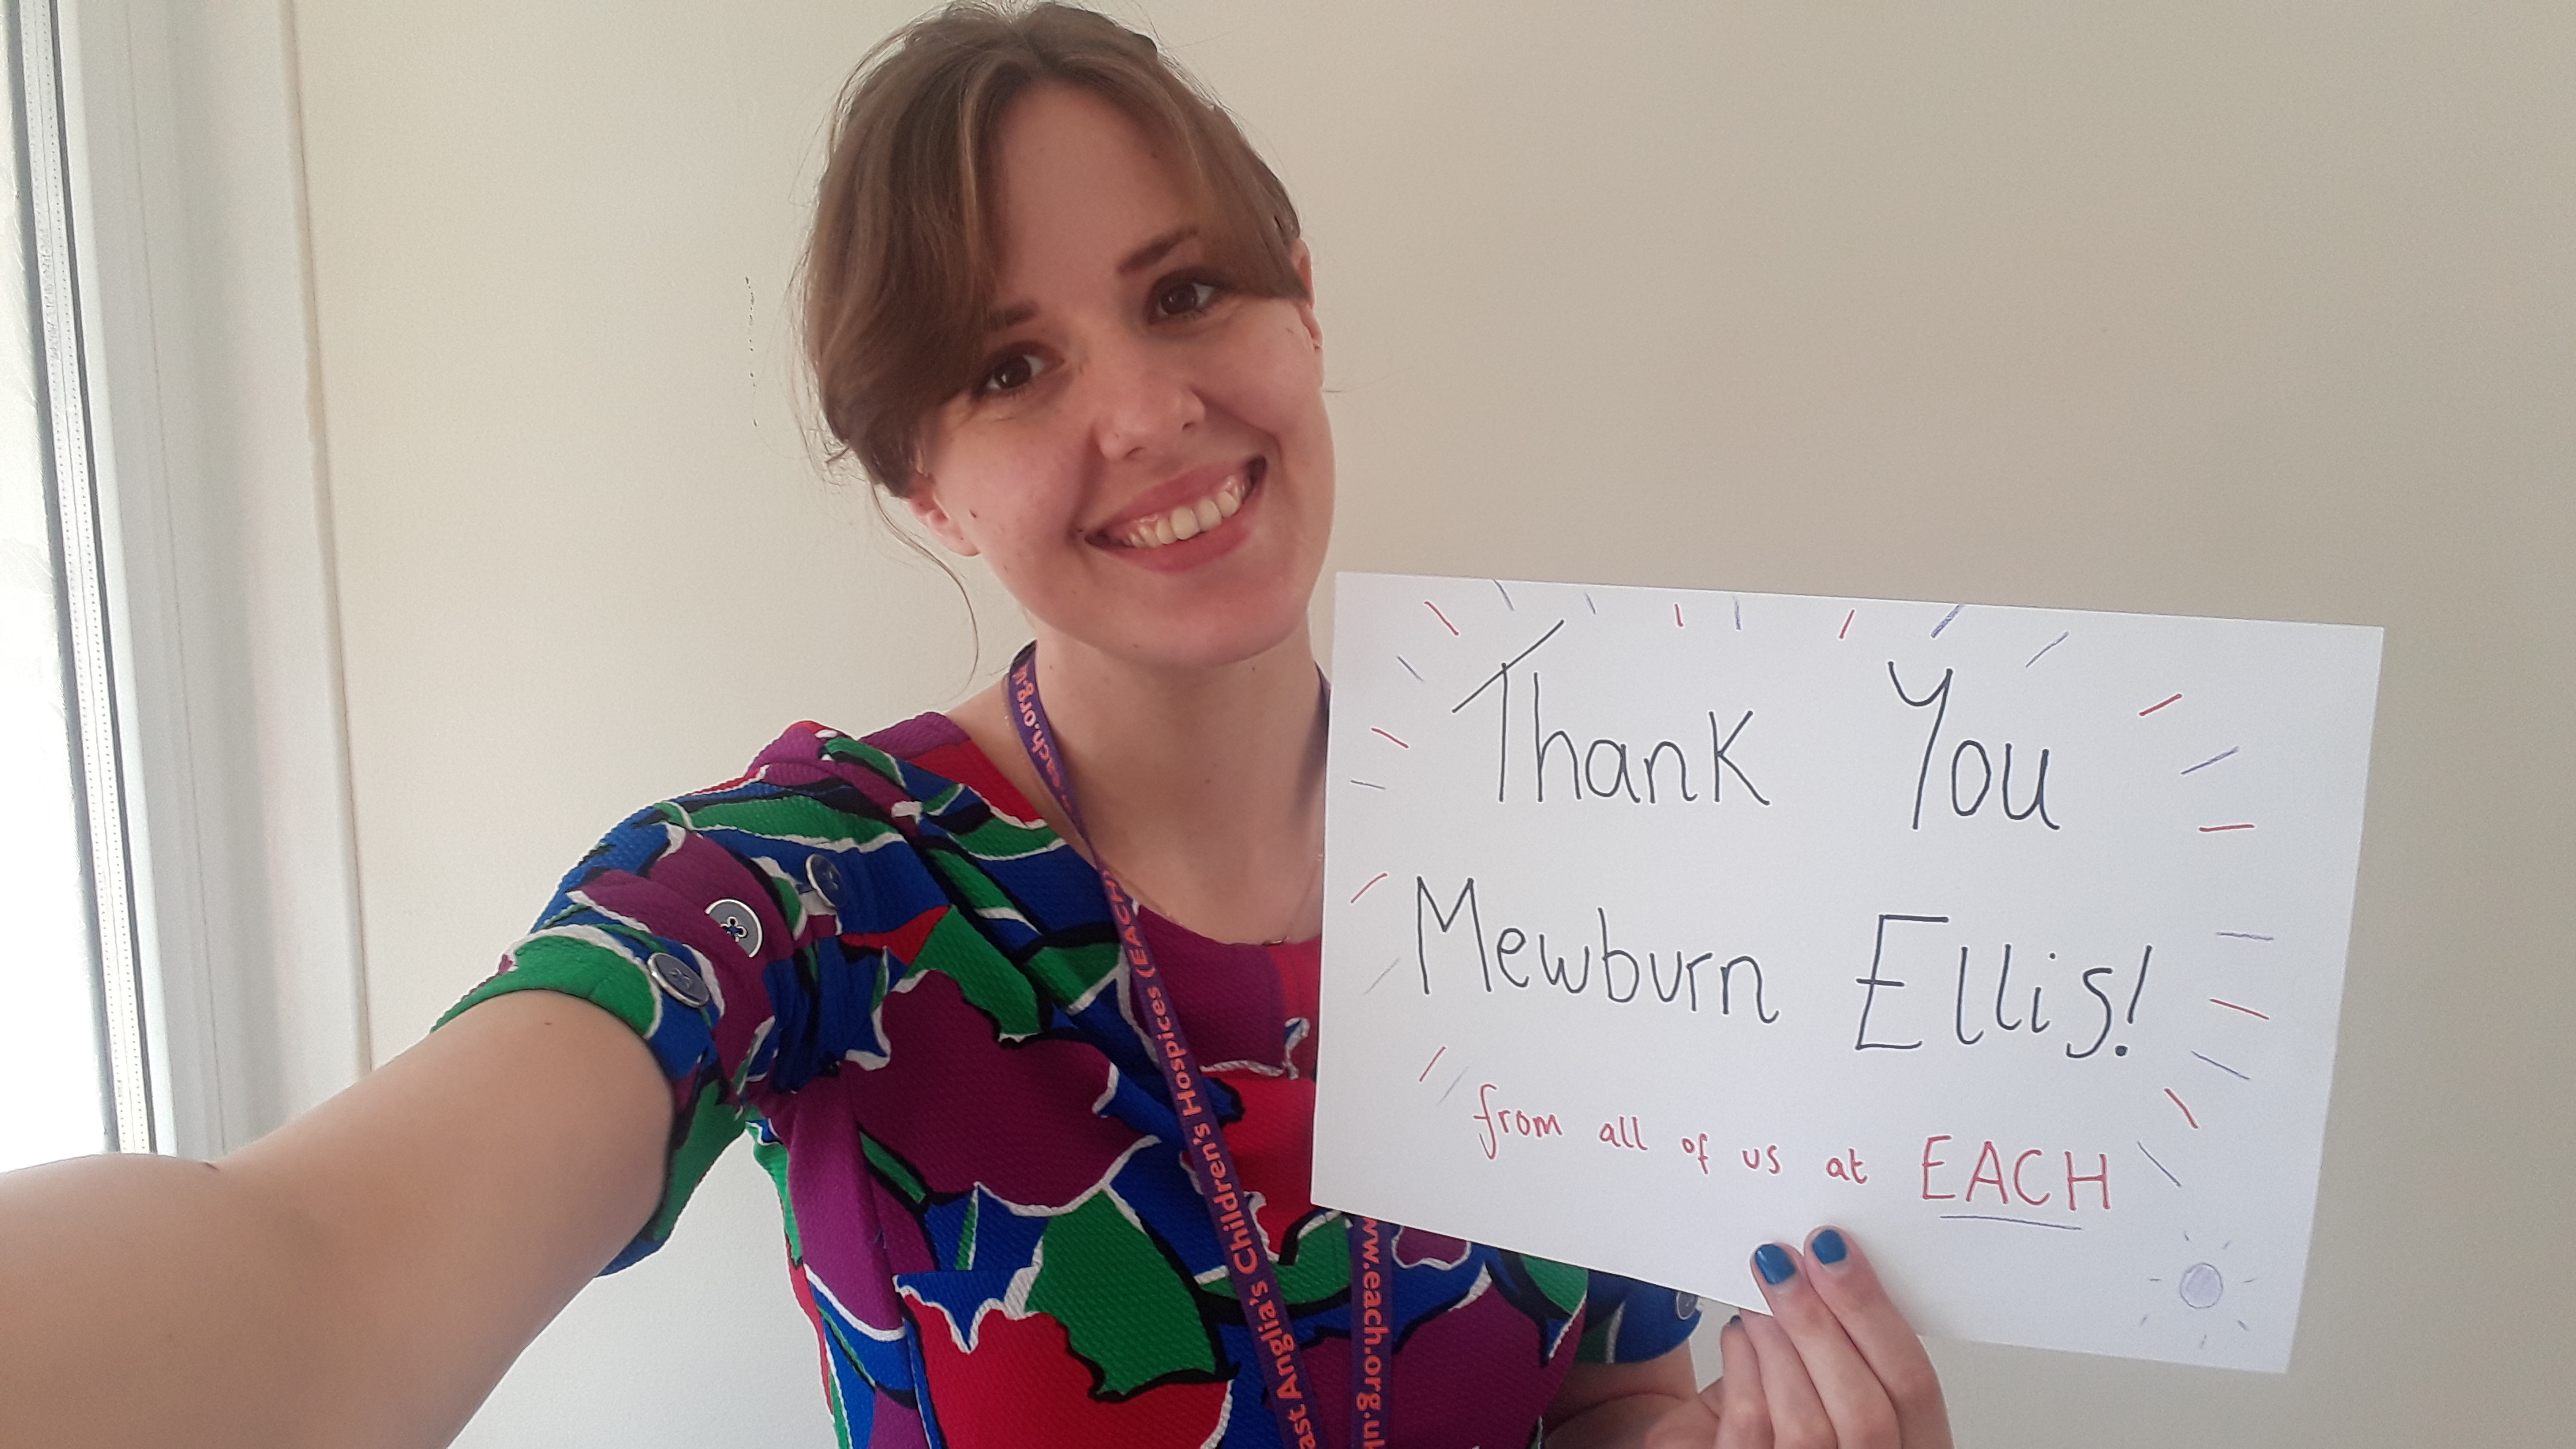 Mewburn Ellis Cambridge donates £15,000, enough to fund 15 sessions of short break care for East Anglian's Children's Hospices (EACH)